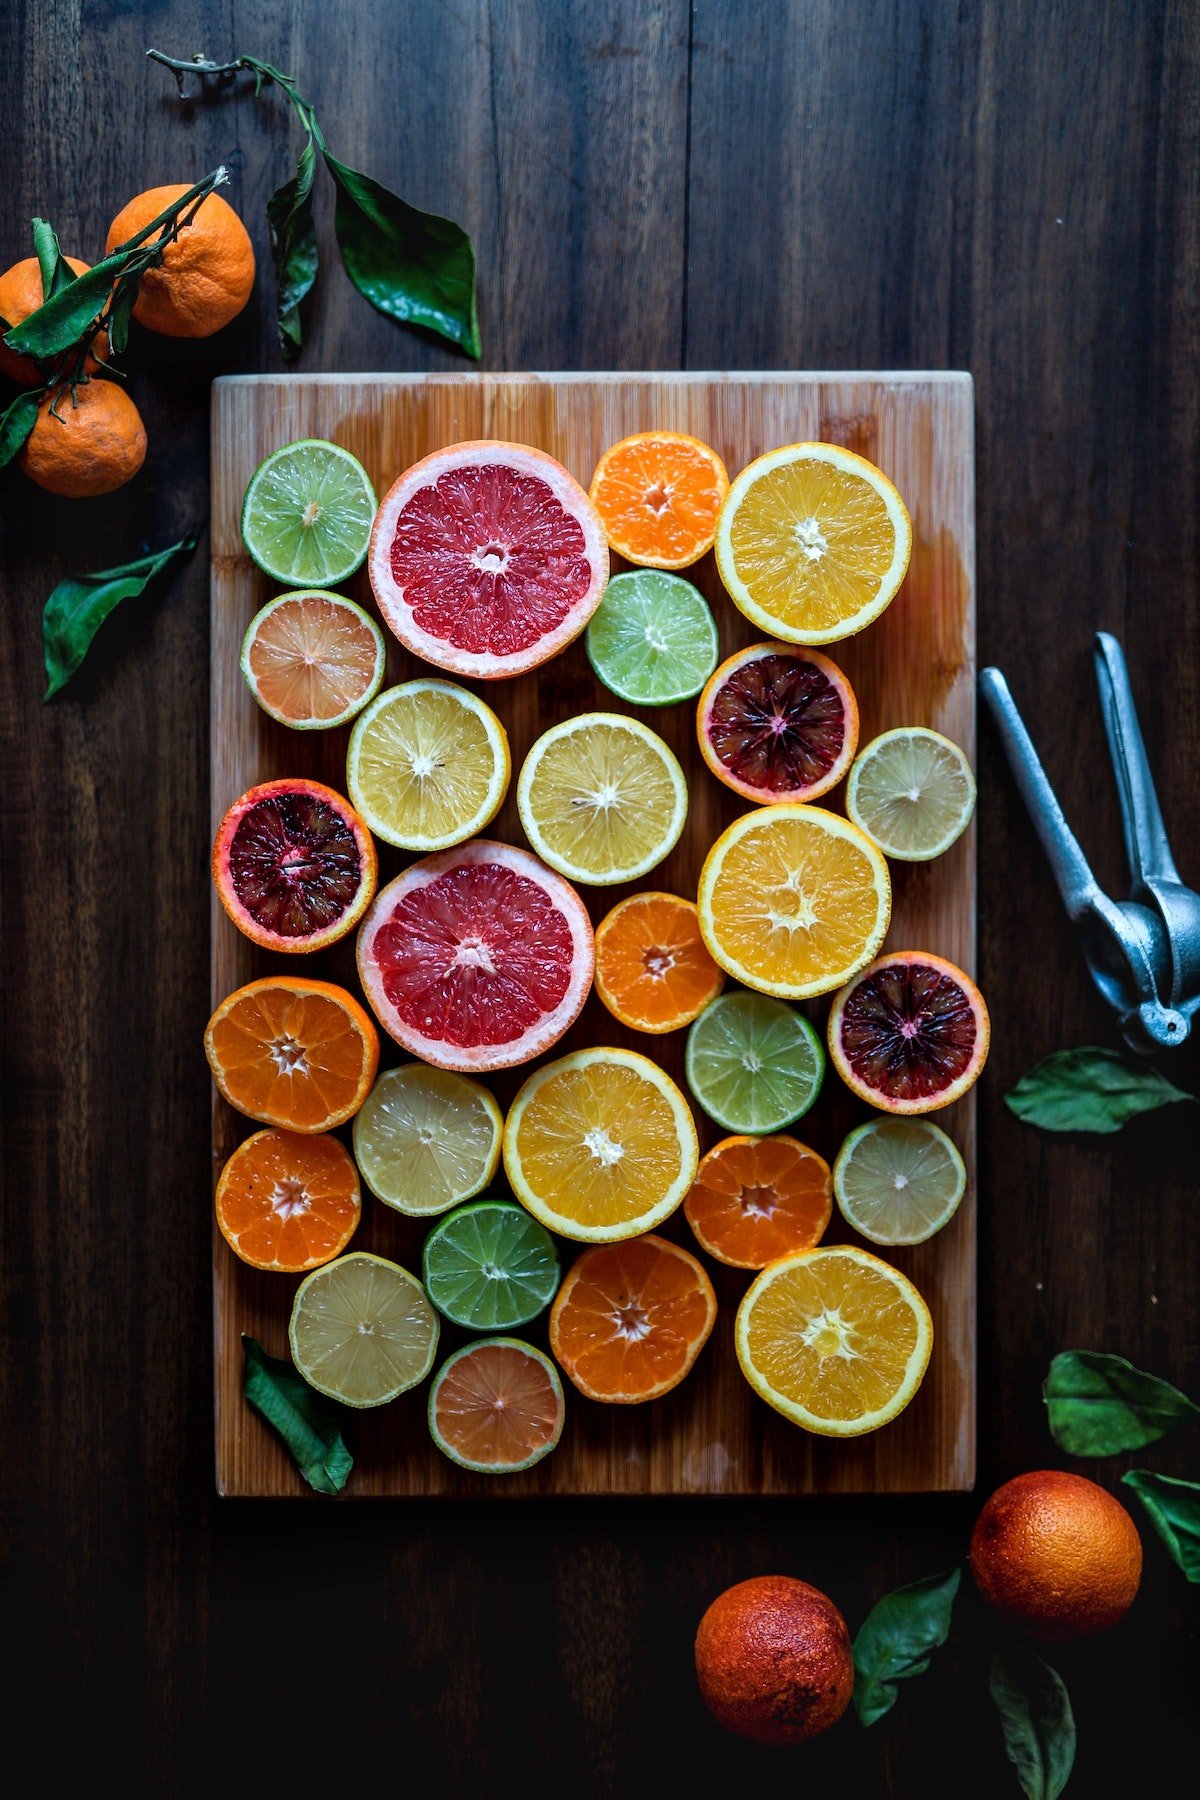 Different citrus fruit on cutting board to represent possible snacks for moms.